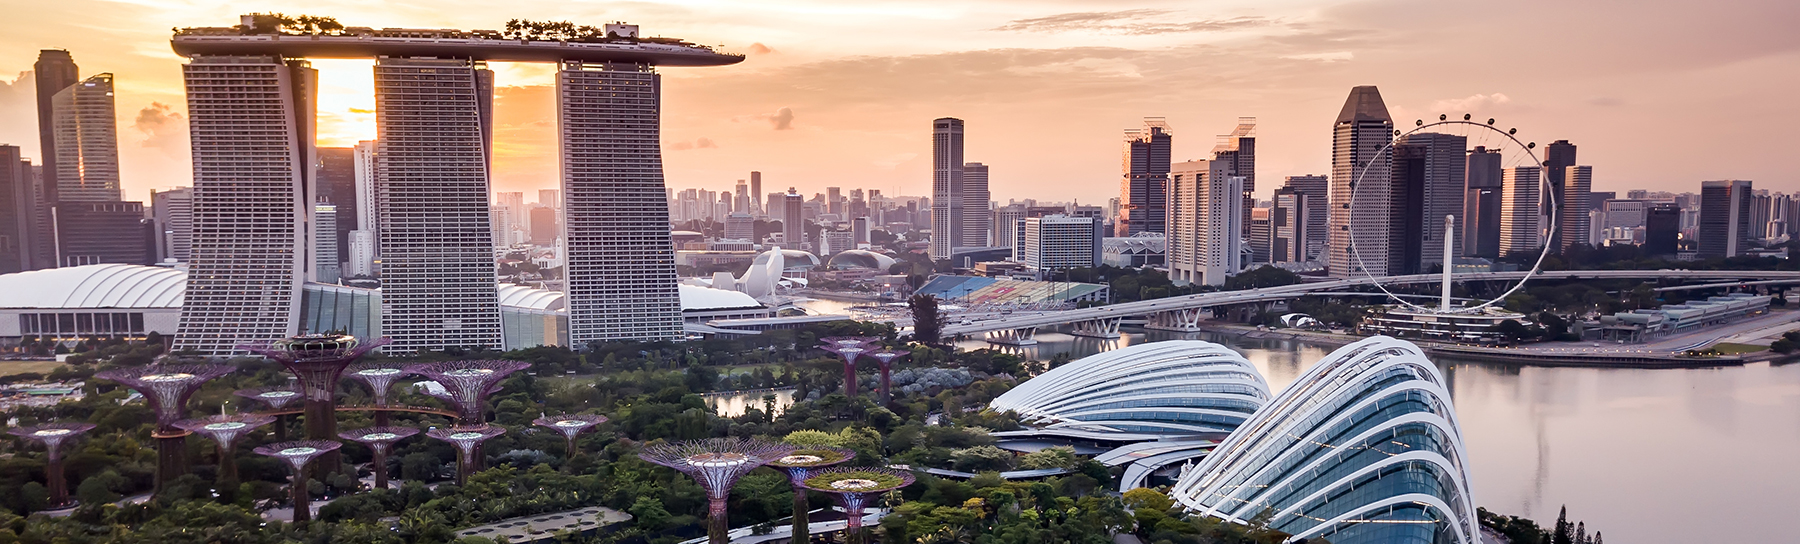 Aerial drone view of Singapore city skyline at sunset